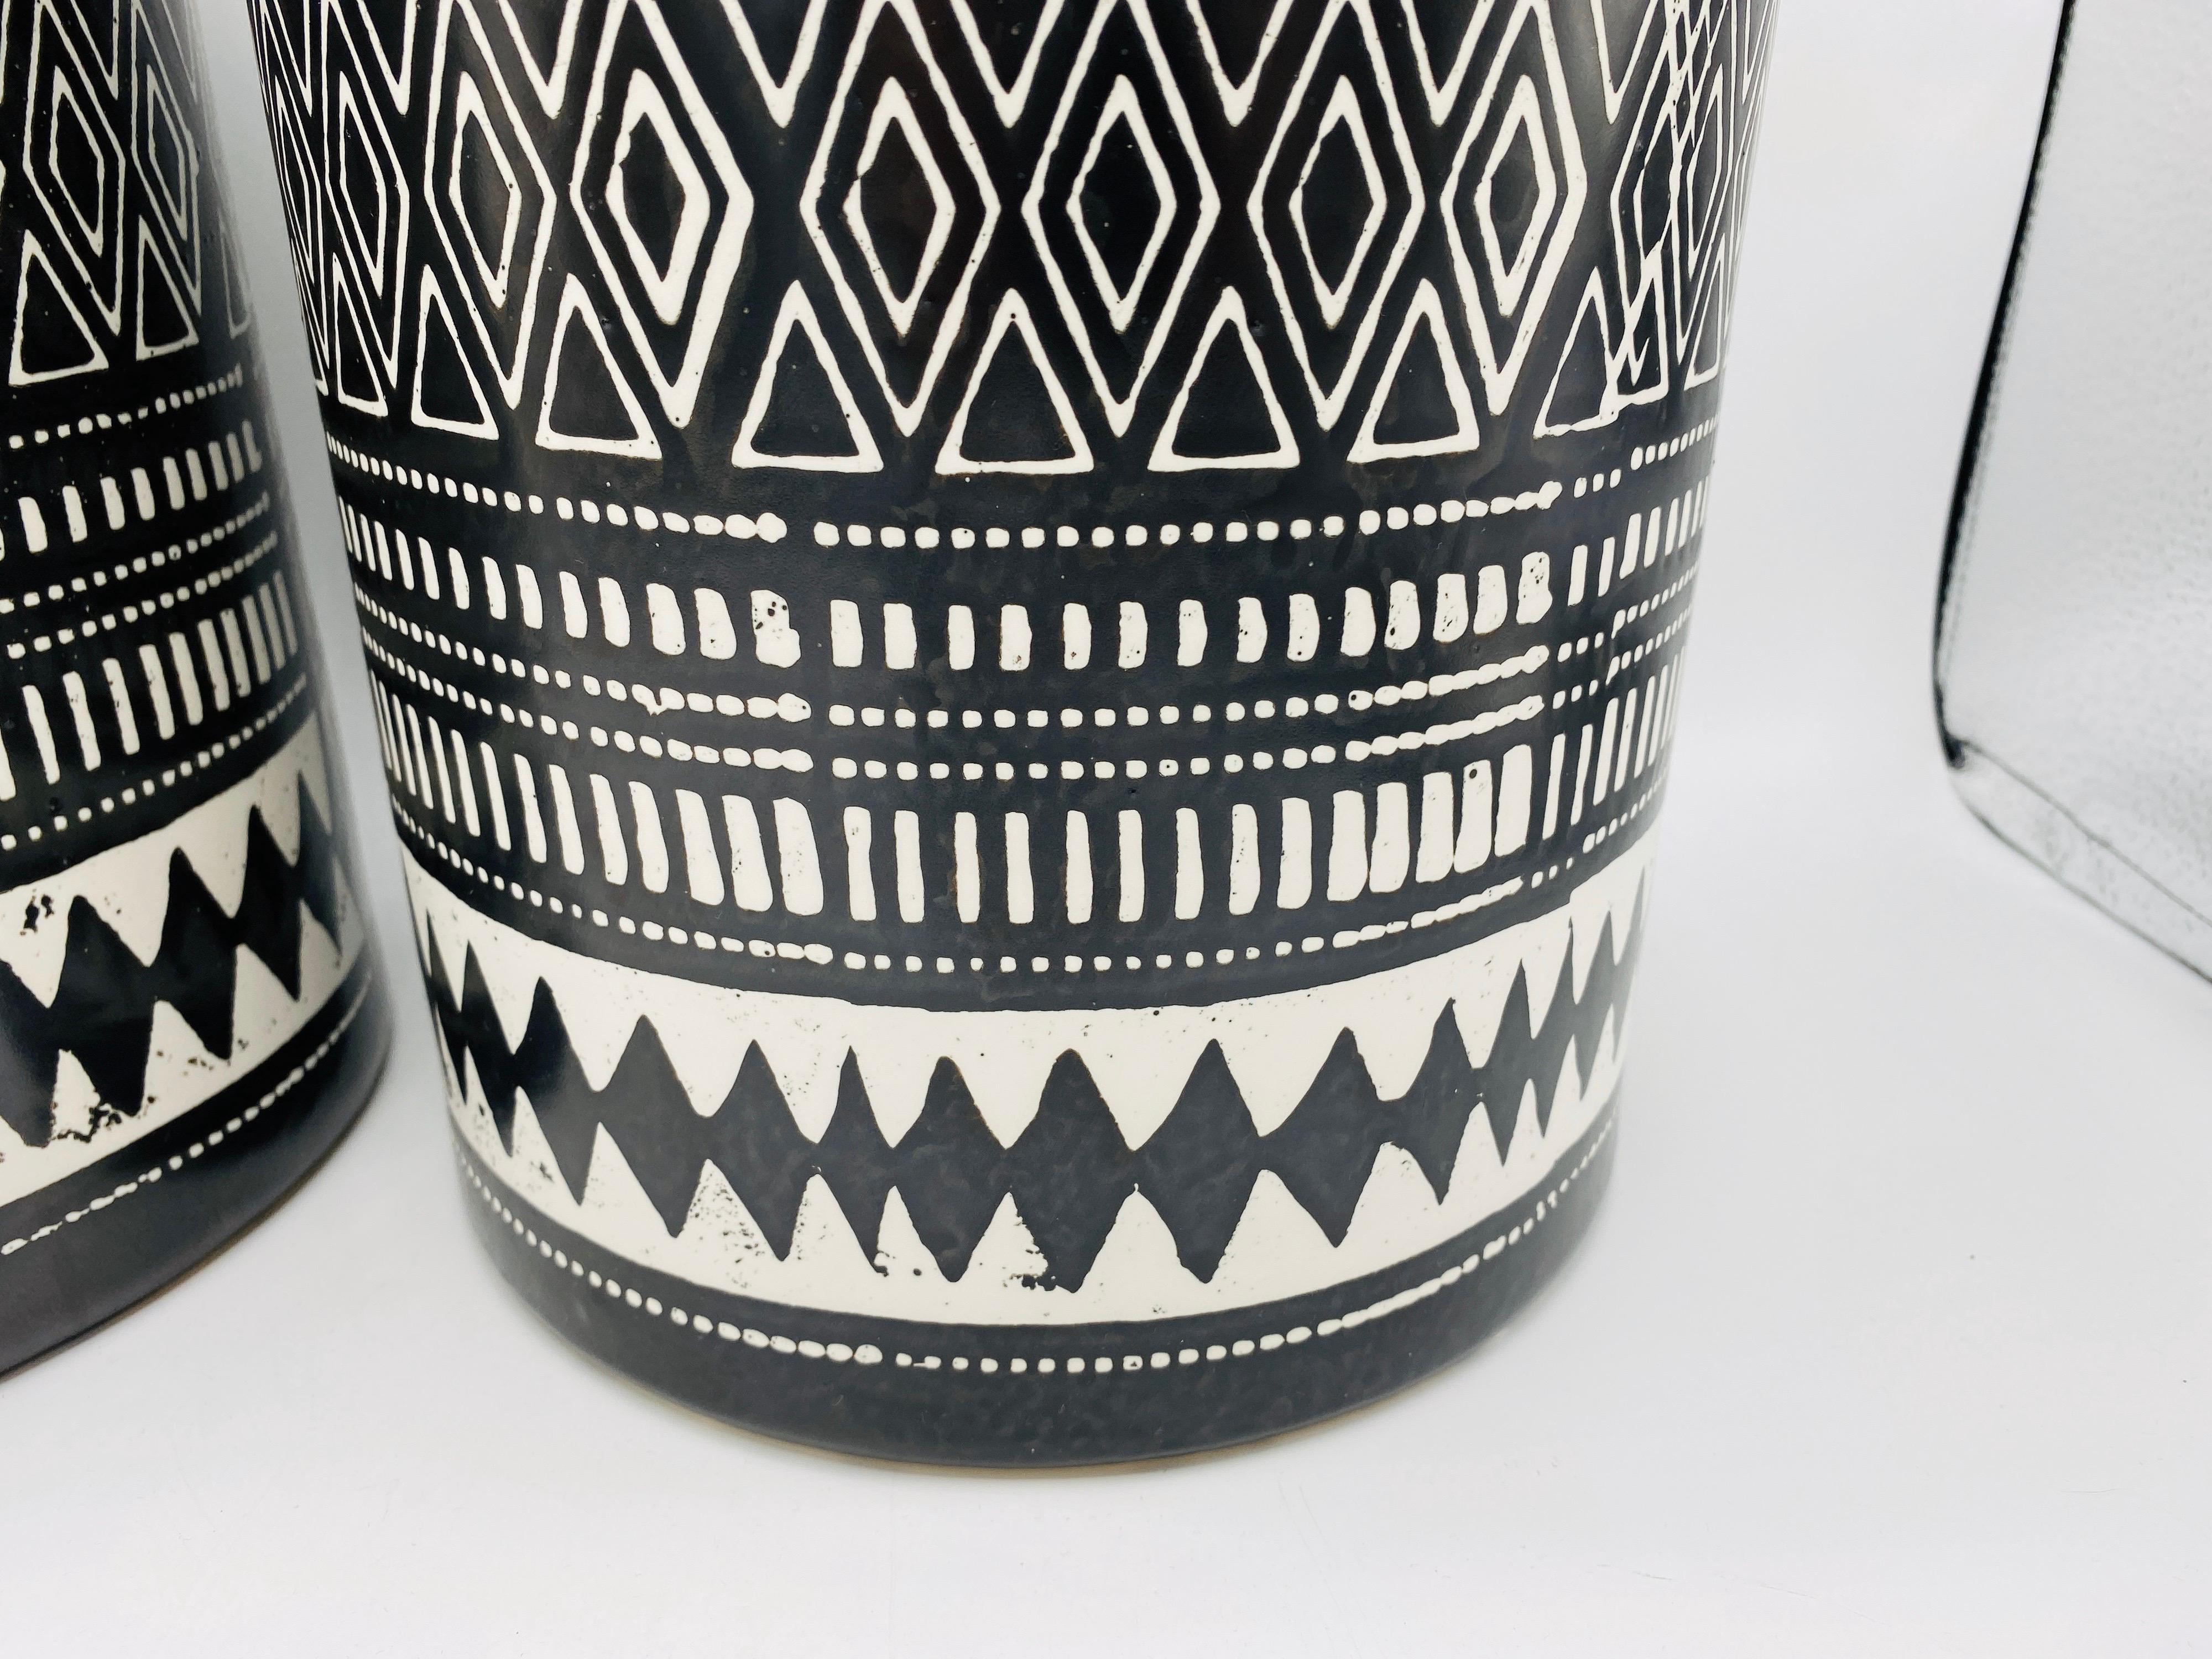 Bohemian Black and White Ceramic Ginger Jar Canisters, Pair For Sale 1